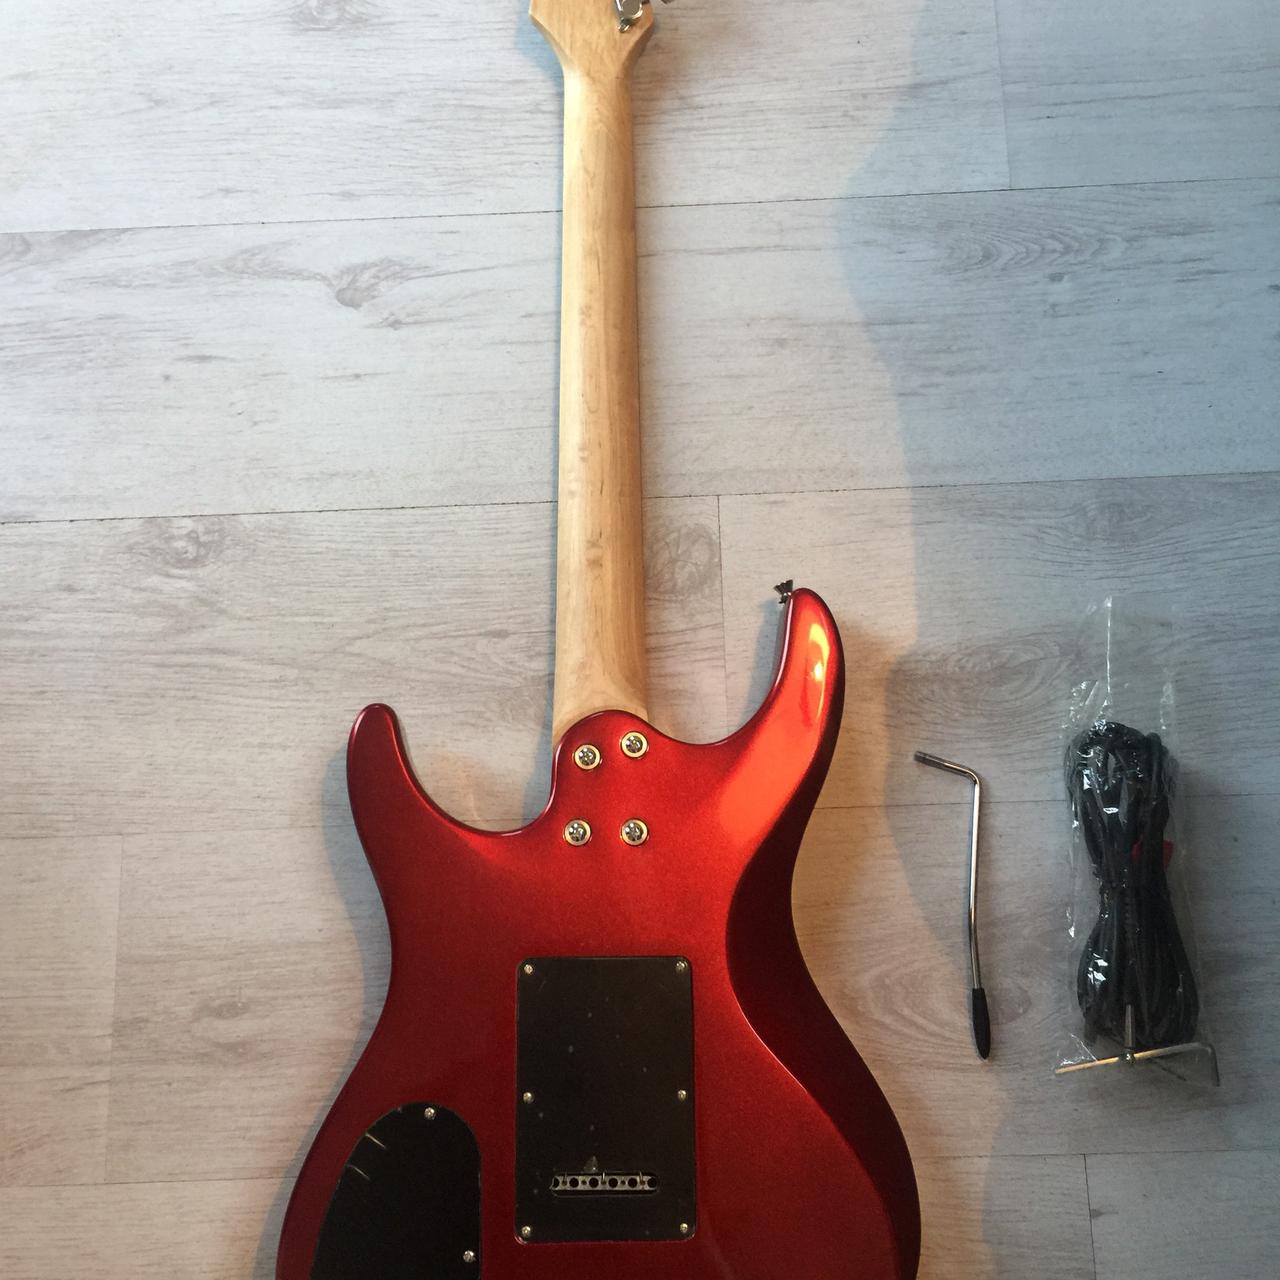 Washburn RX10 in metallic red, mint condition, used - Depop